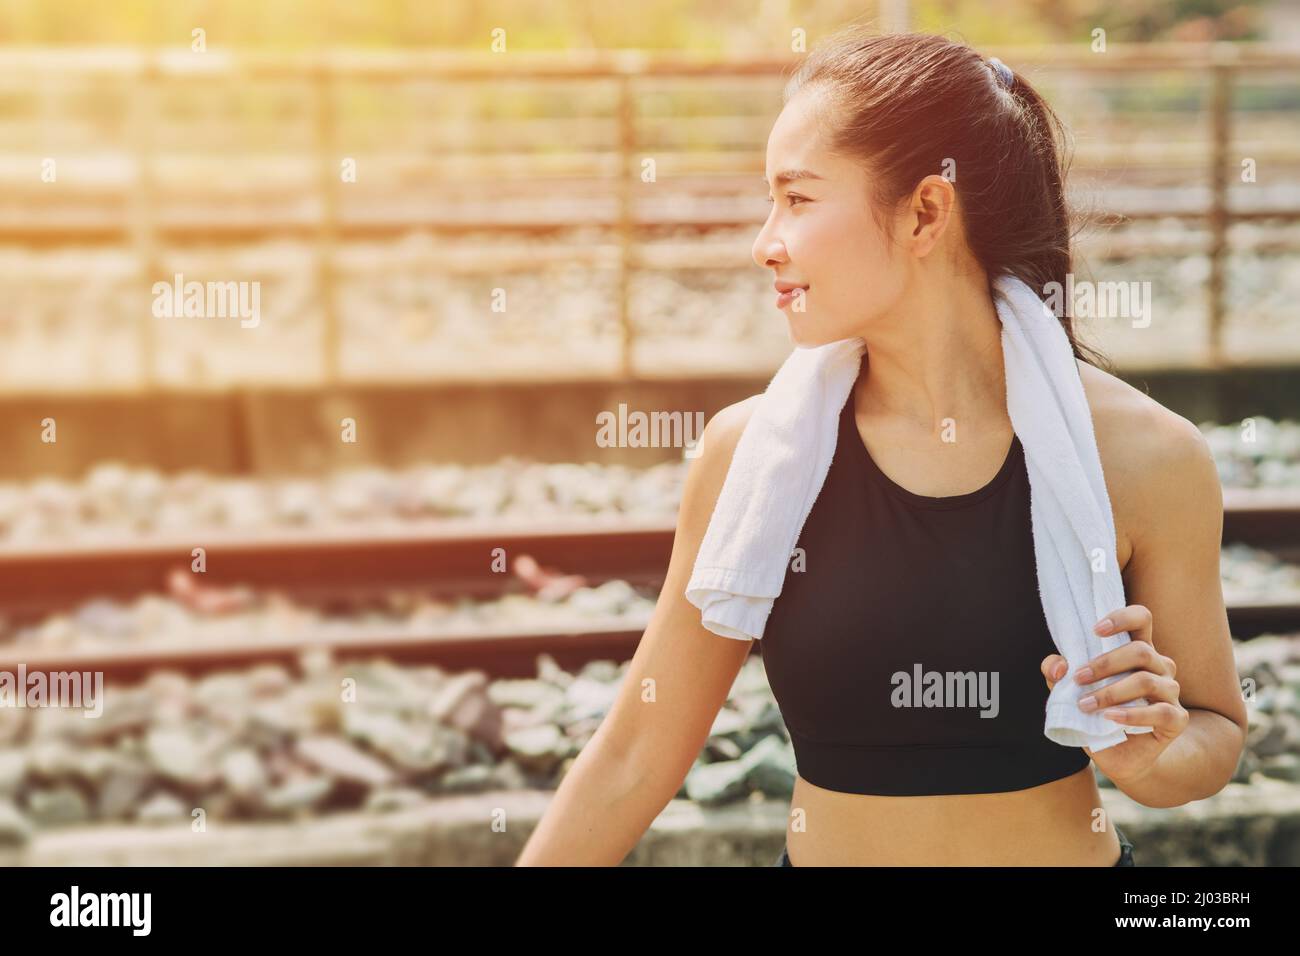 women healthy lifestyle happy smile outdoor. Sun protection skin care for sport people concept. Stock Photo